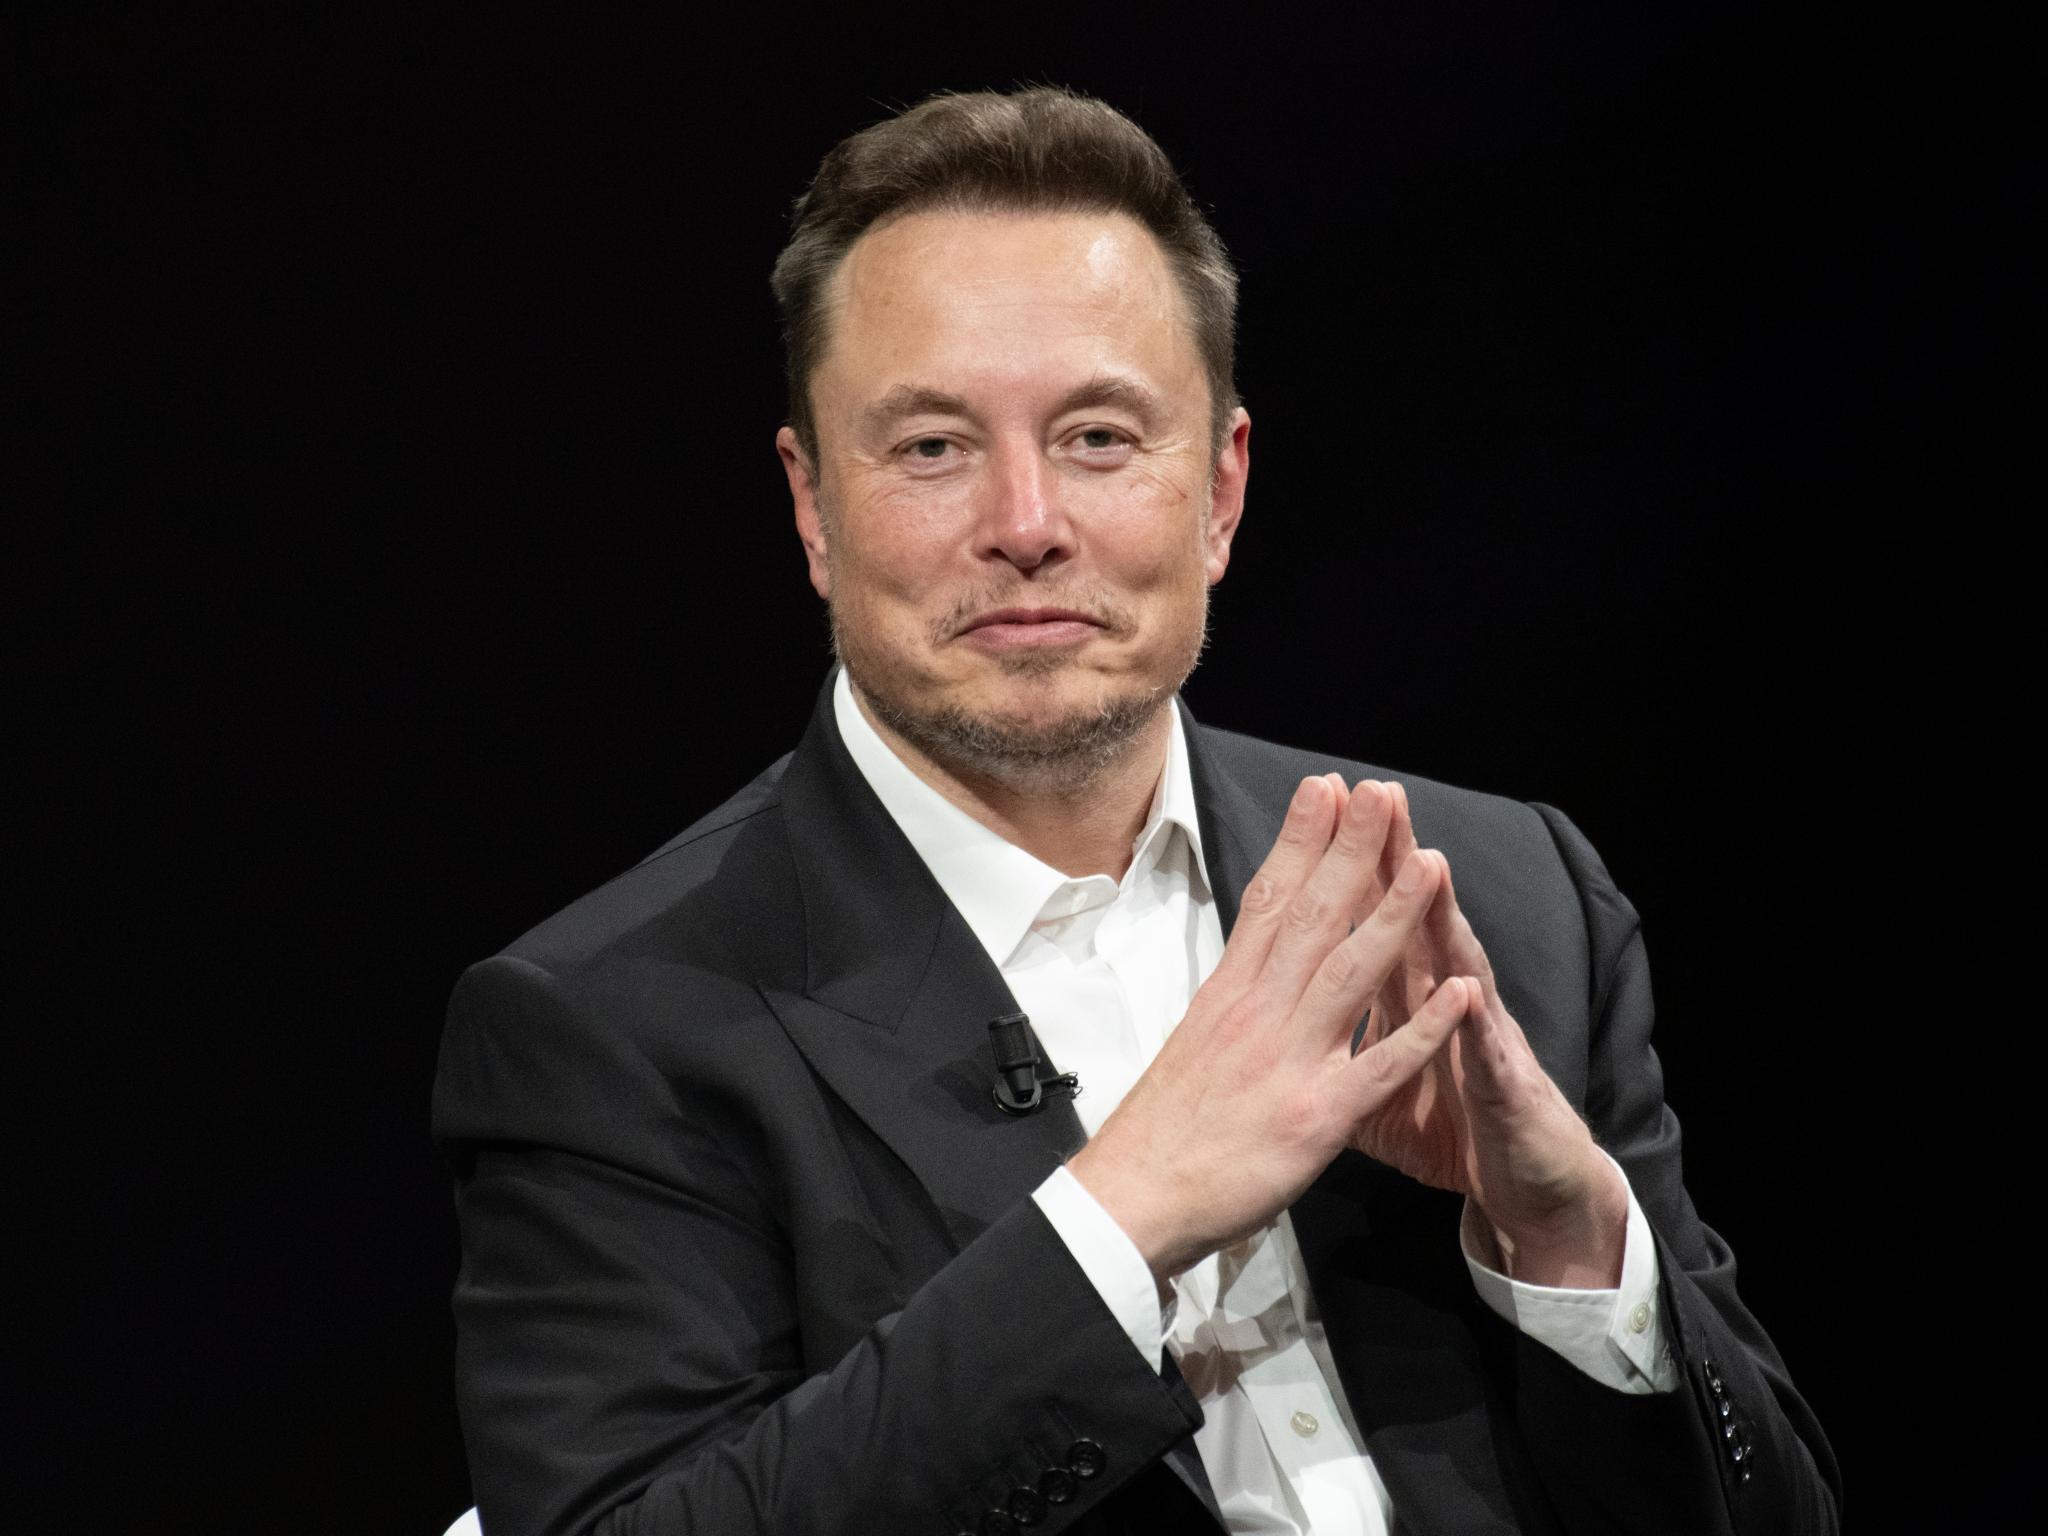 Elon Musk Shares Who He’d Want To Spend His Last Moments With In Response To Warren Buffett’s Advice